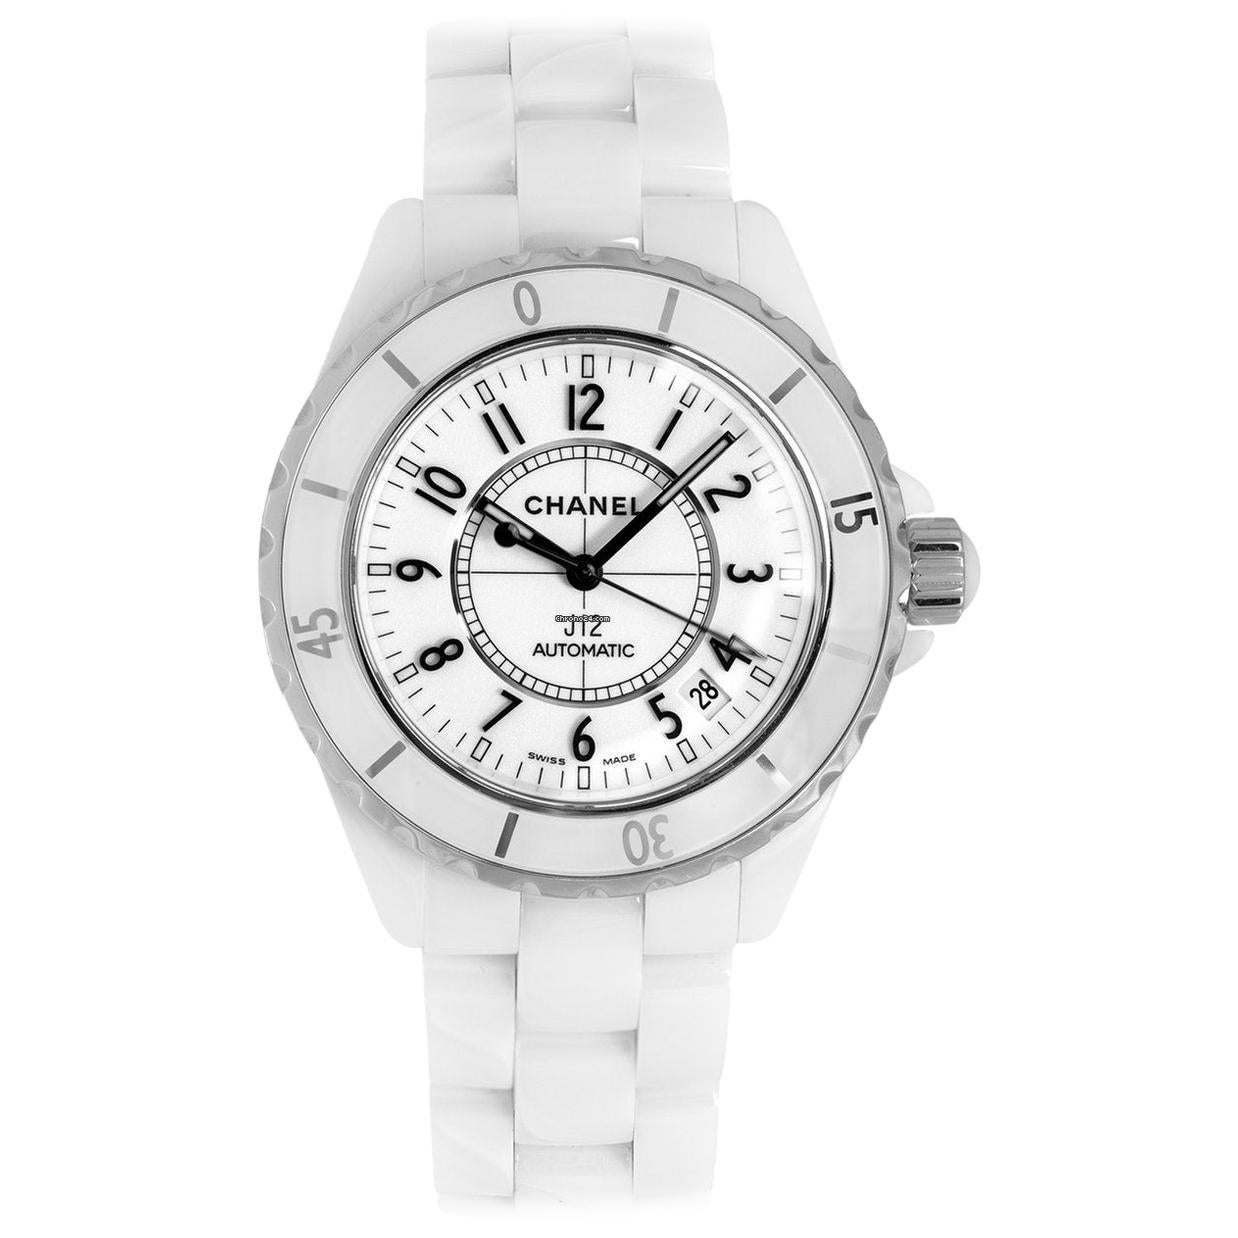 Women's Chanel J12 White Ceramic and Stainless Steel Watch with Fixed Bezel